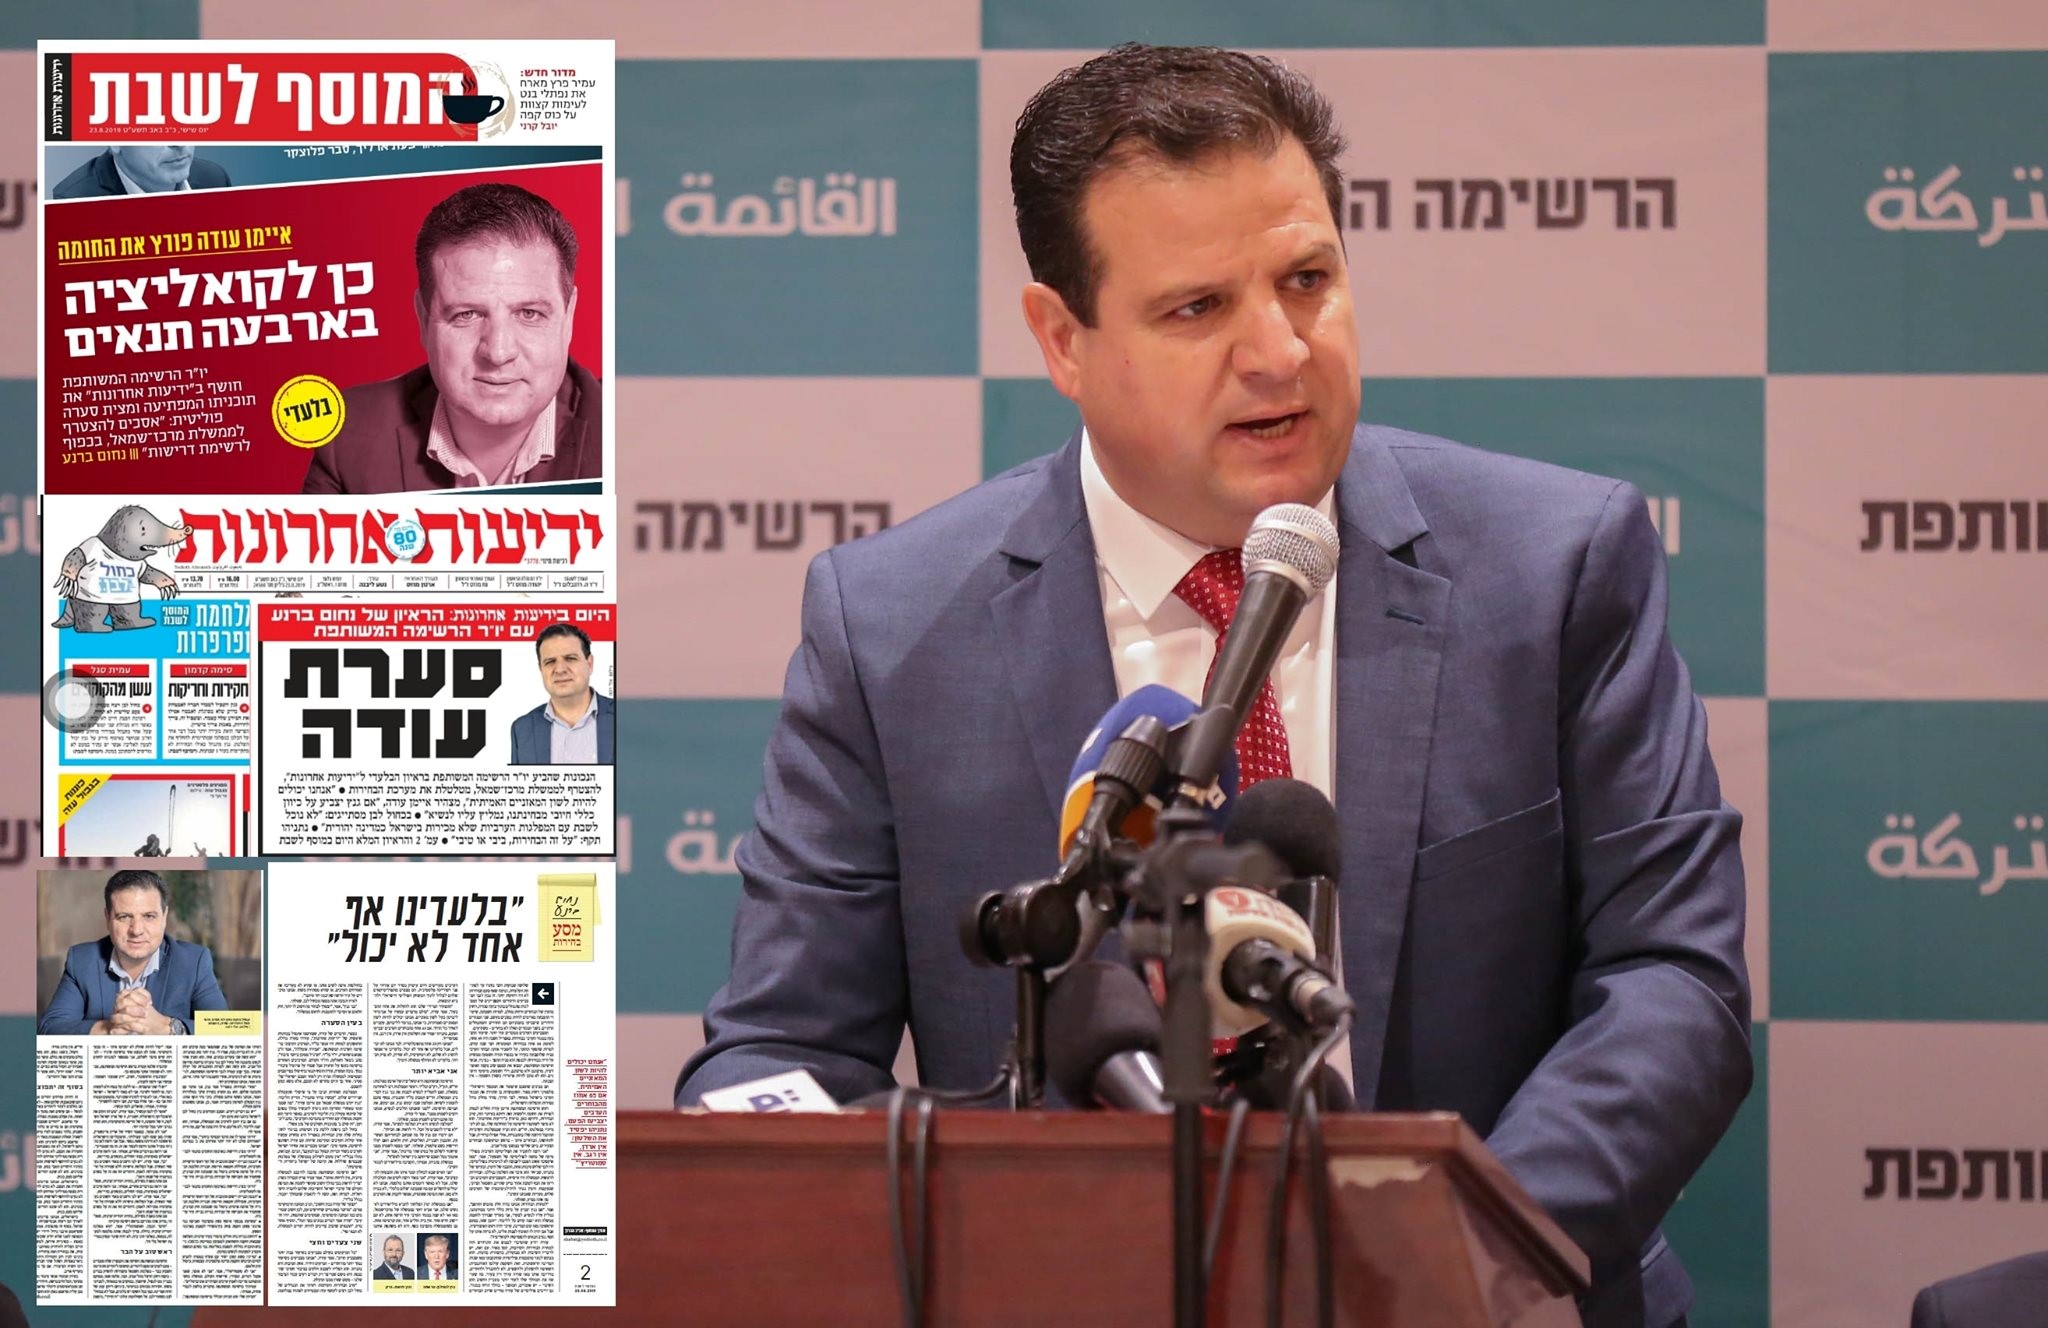 MK Ayman Odeh addresses a Joint List gathering; to the left, headlines from Yedioth Ahronoth relating to Odeh: "Yes to a Coalition under Four conditions"; "Odeh's Storm"; "Without Us Nobody Can"